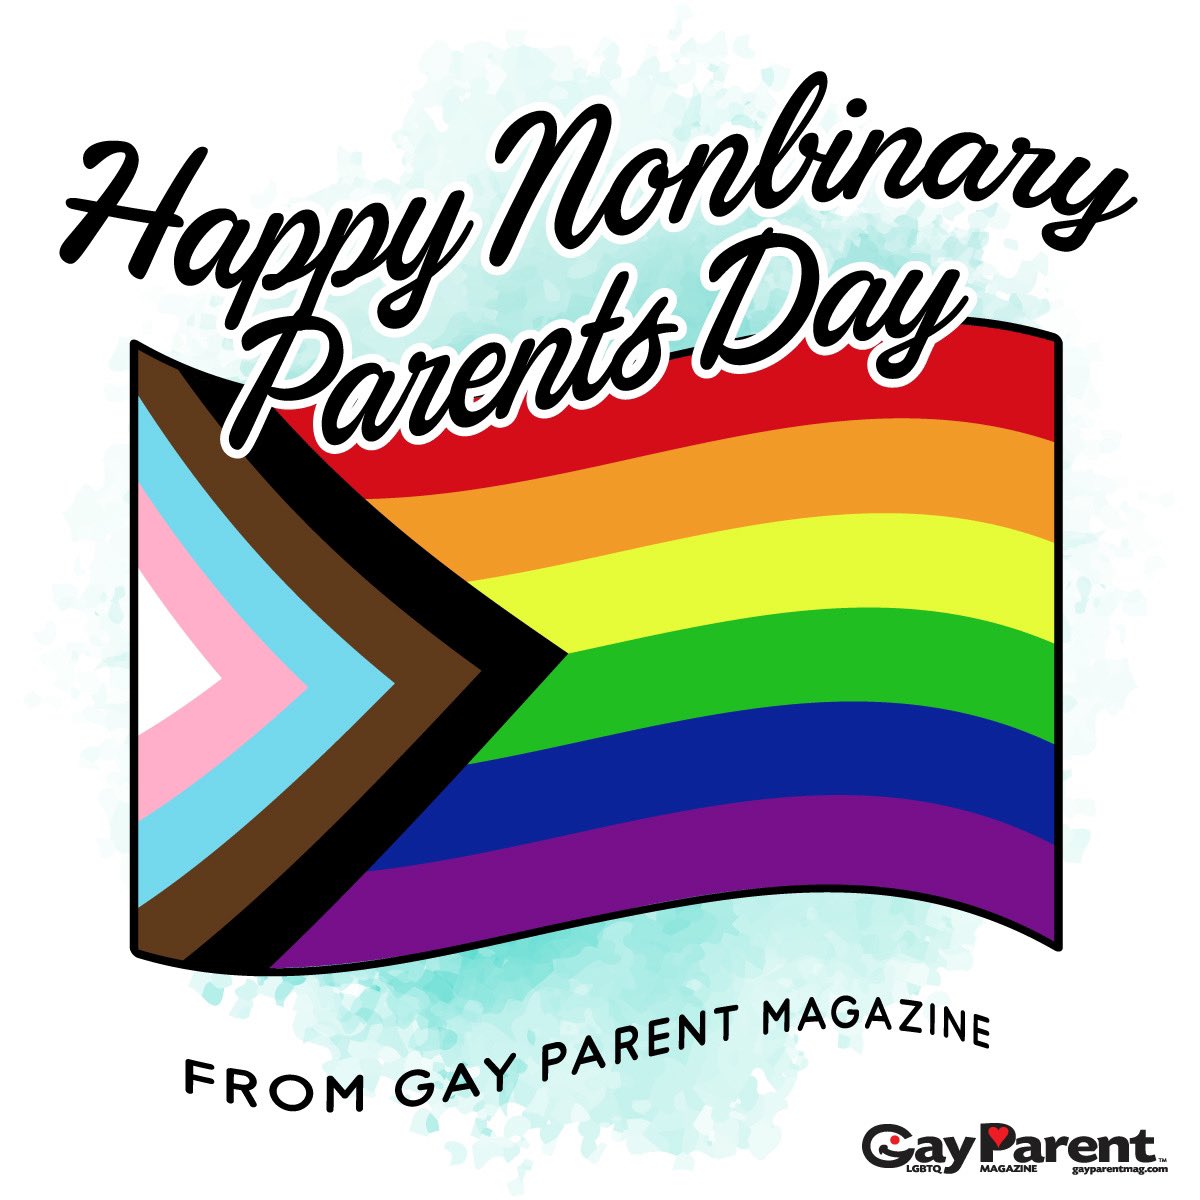 Happy Nonbinary Parents’ Day from #GayParentMagazine Visit our website at gayparentmag.com 🏳️‍🌈🏳️‍⚧️ 

#lgbtqfamilies #lgbtqparenting #queerfamilies #queerparenting #adoption #fostercare #IVF #assistedreproduction #surrogacy #nonbinary